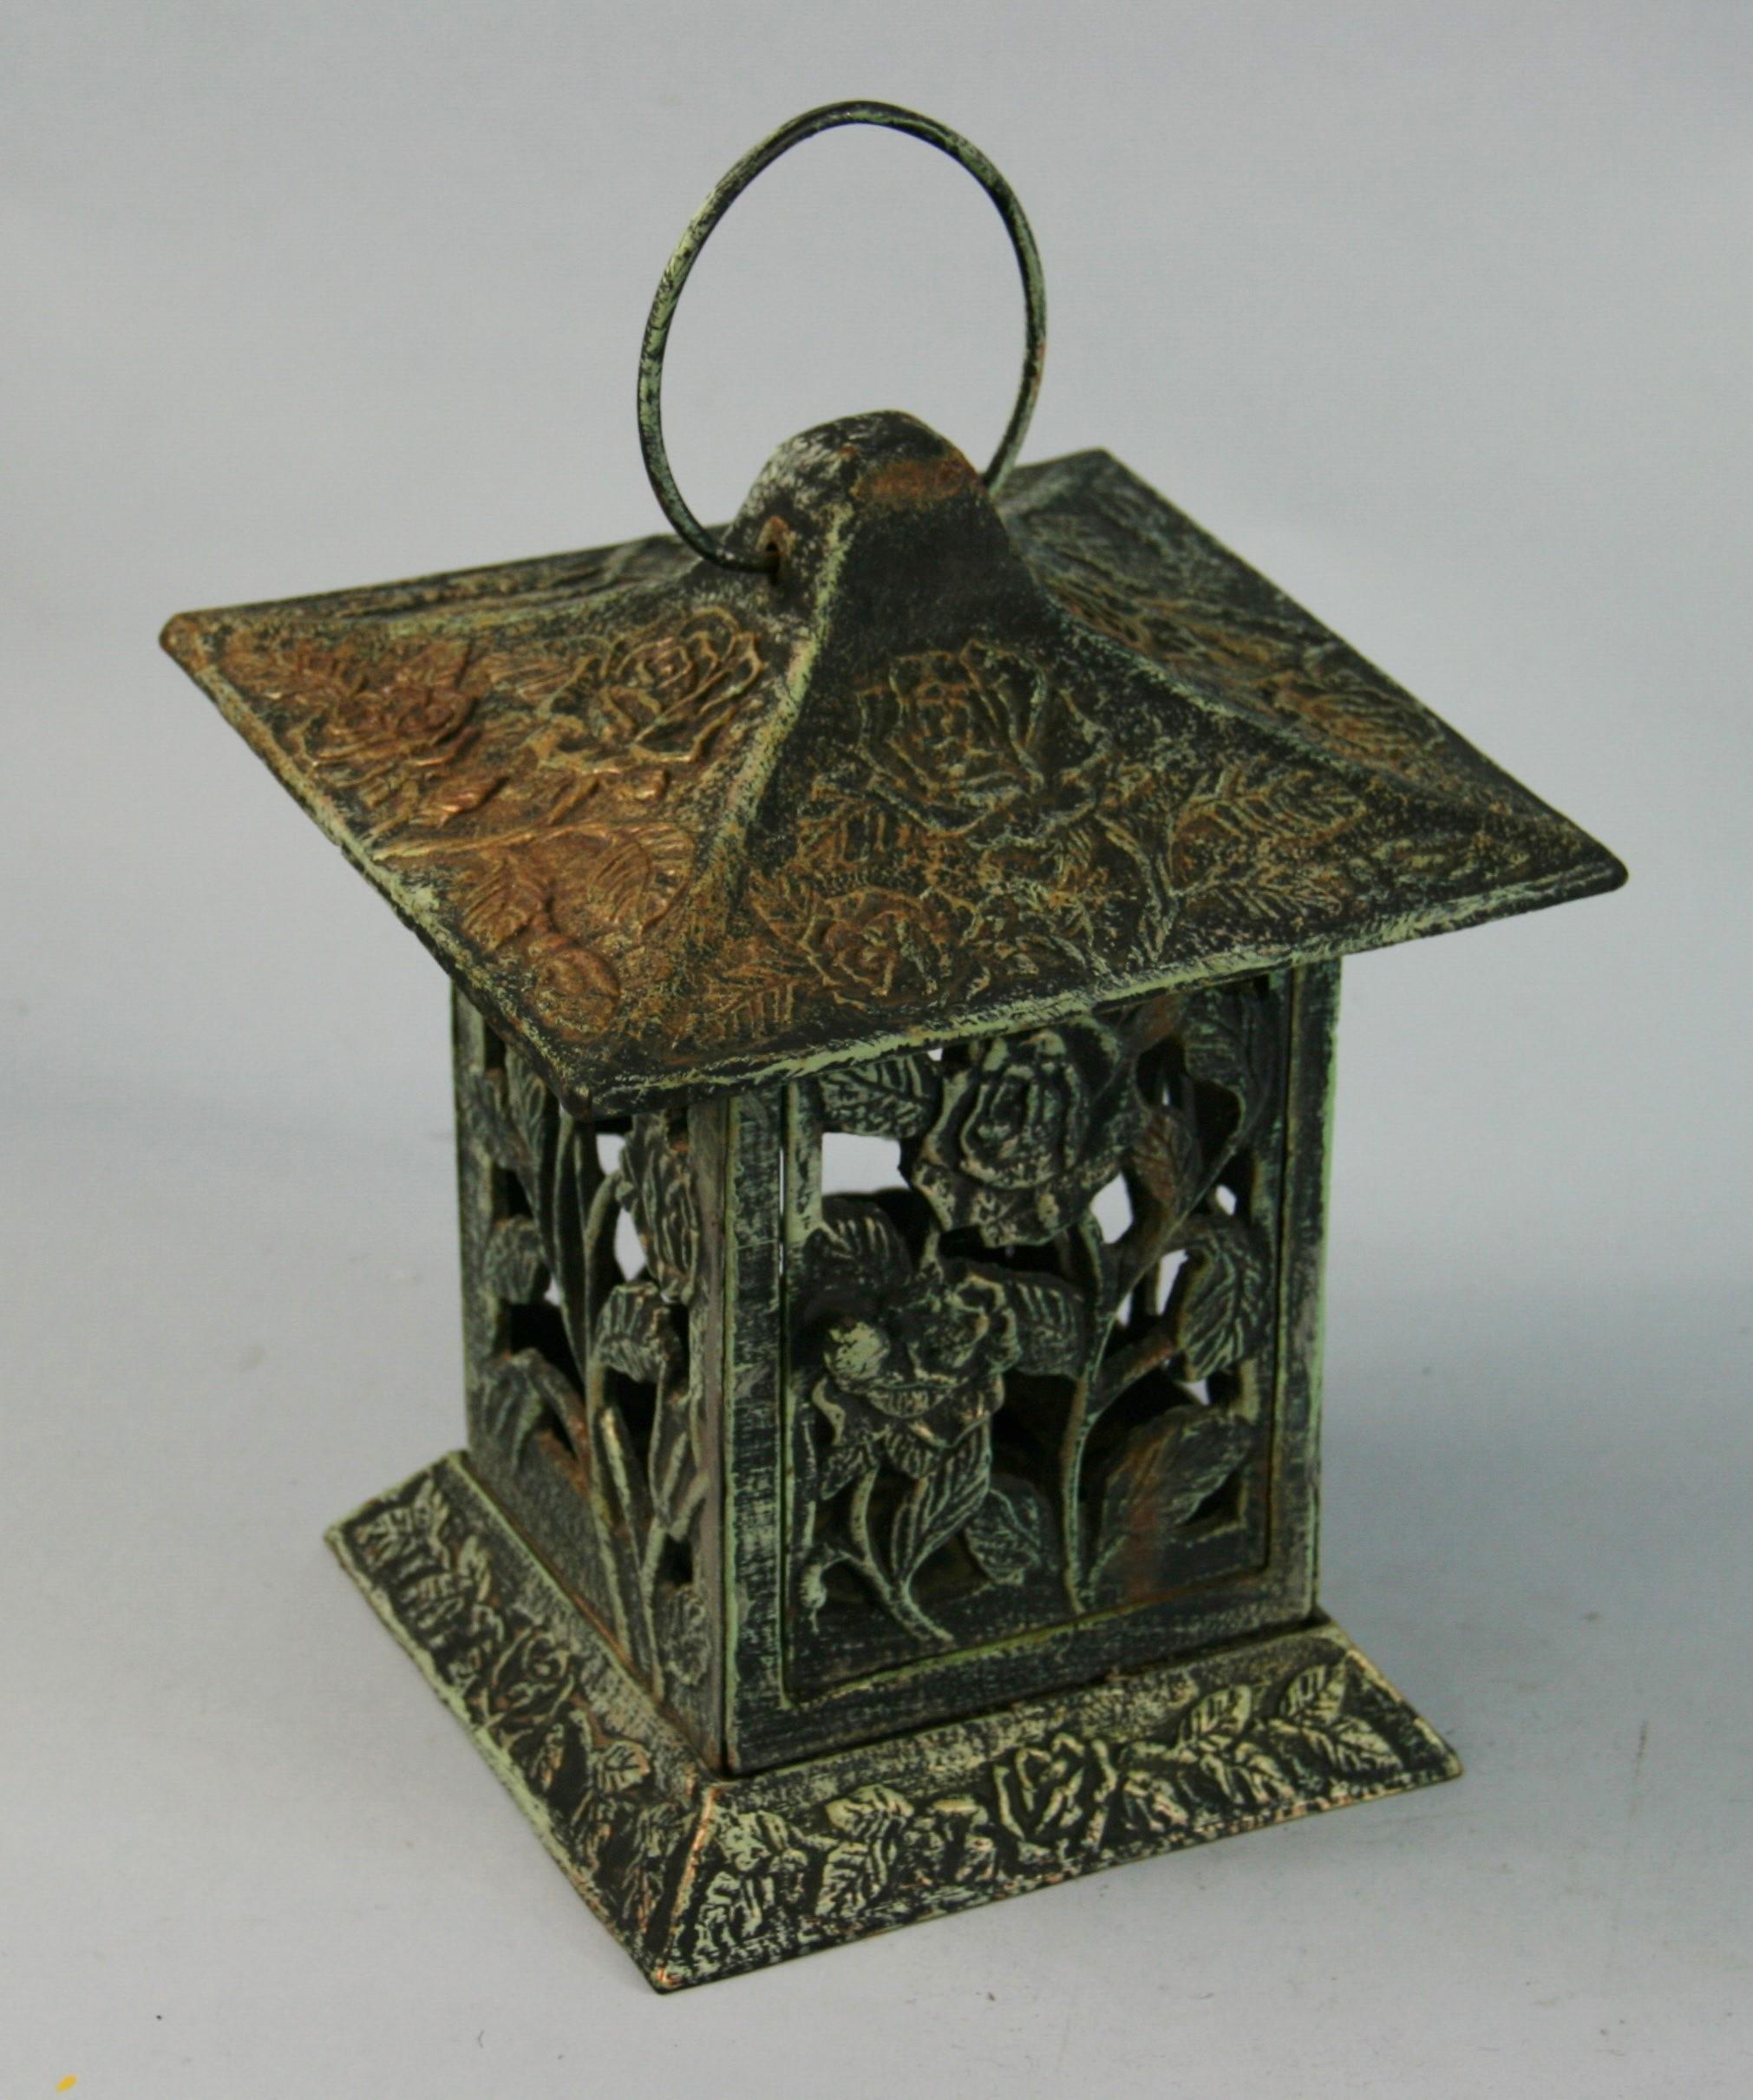 Japanese cast iron candle lantern with roses and leaves
Height without loop 10.5
Height with loop 13